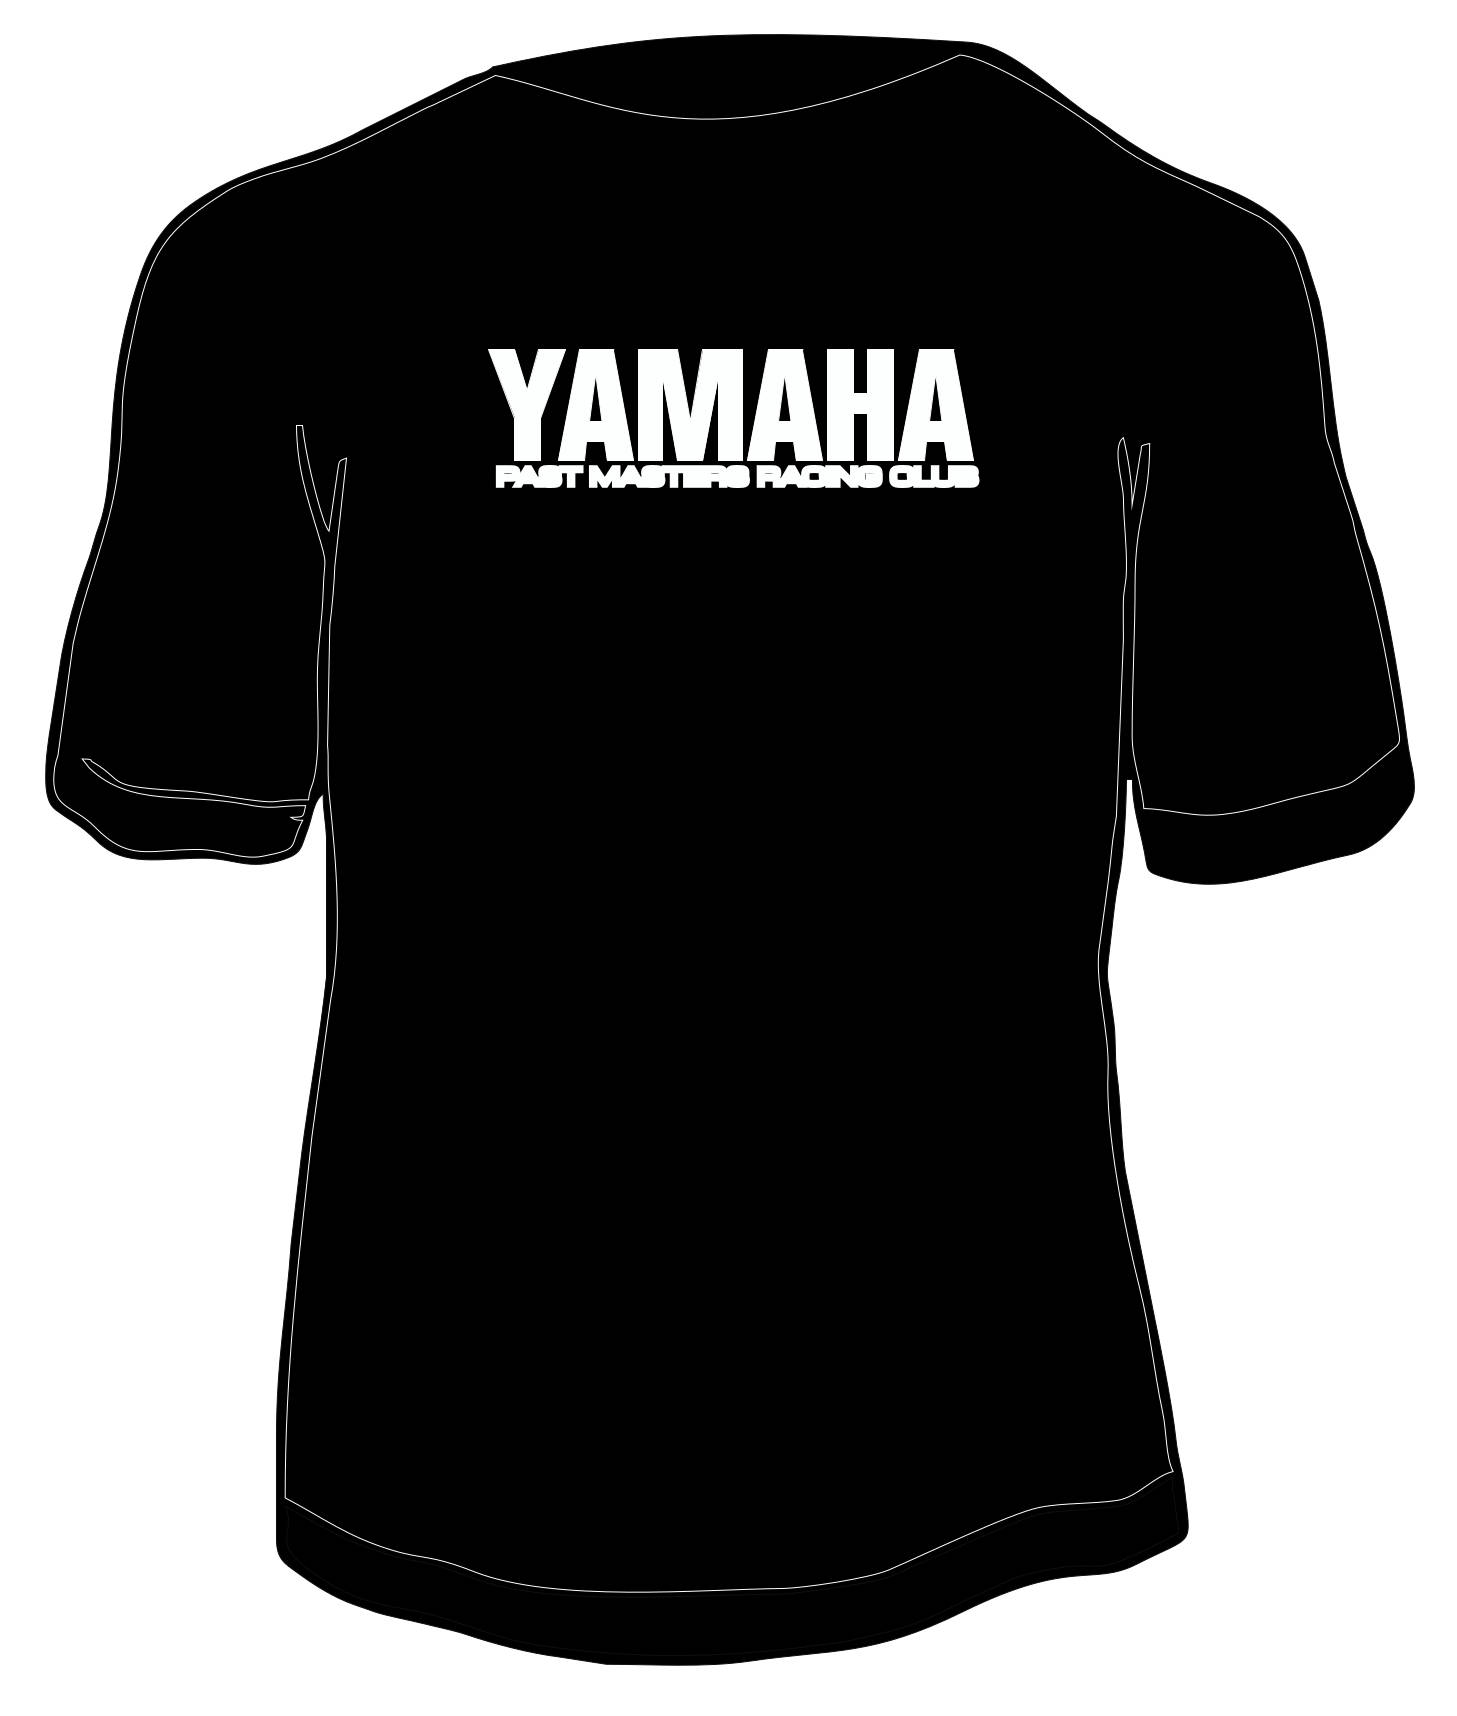 Link to view the entire product category The YPM Clothing Collection